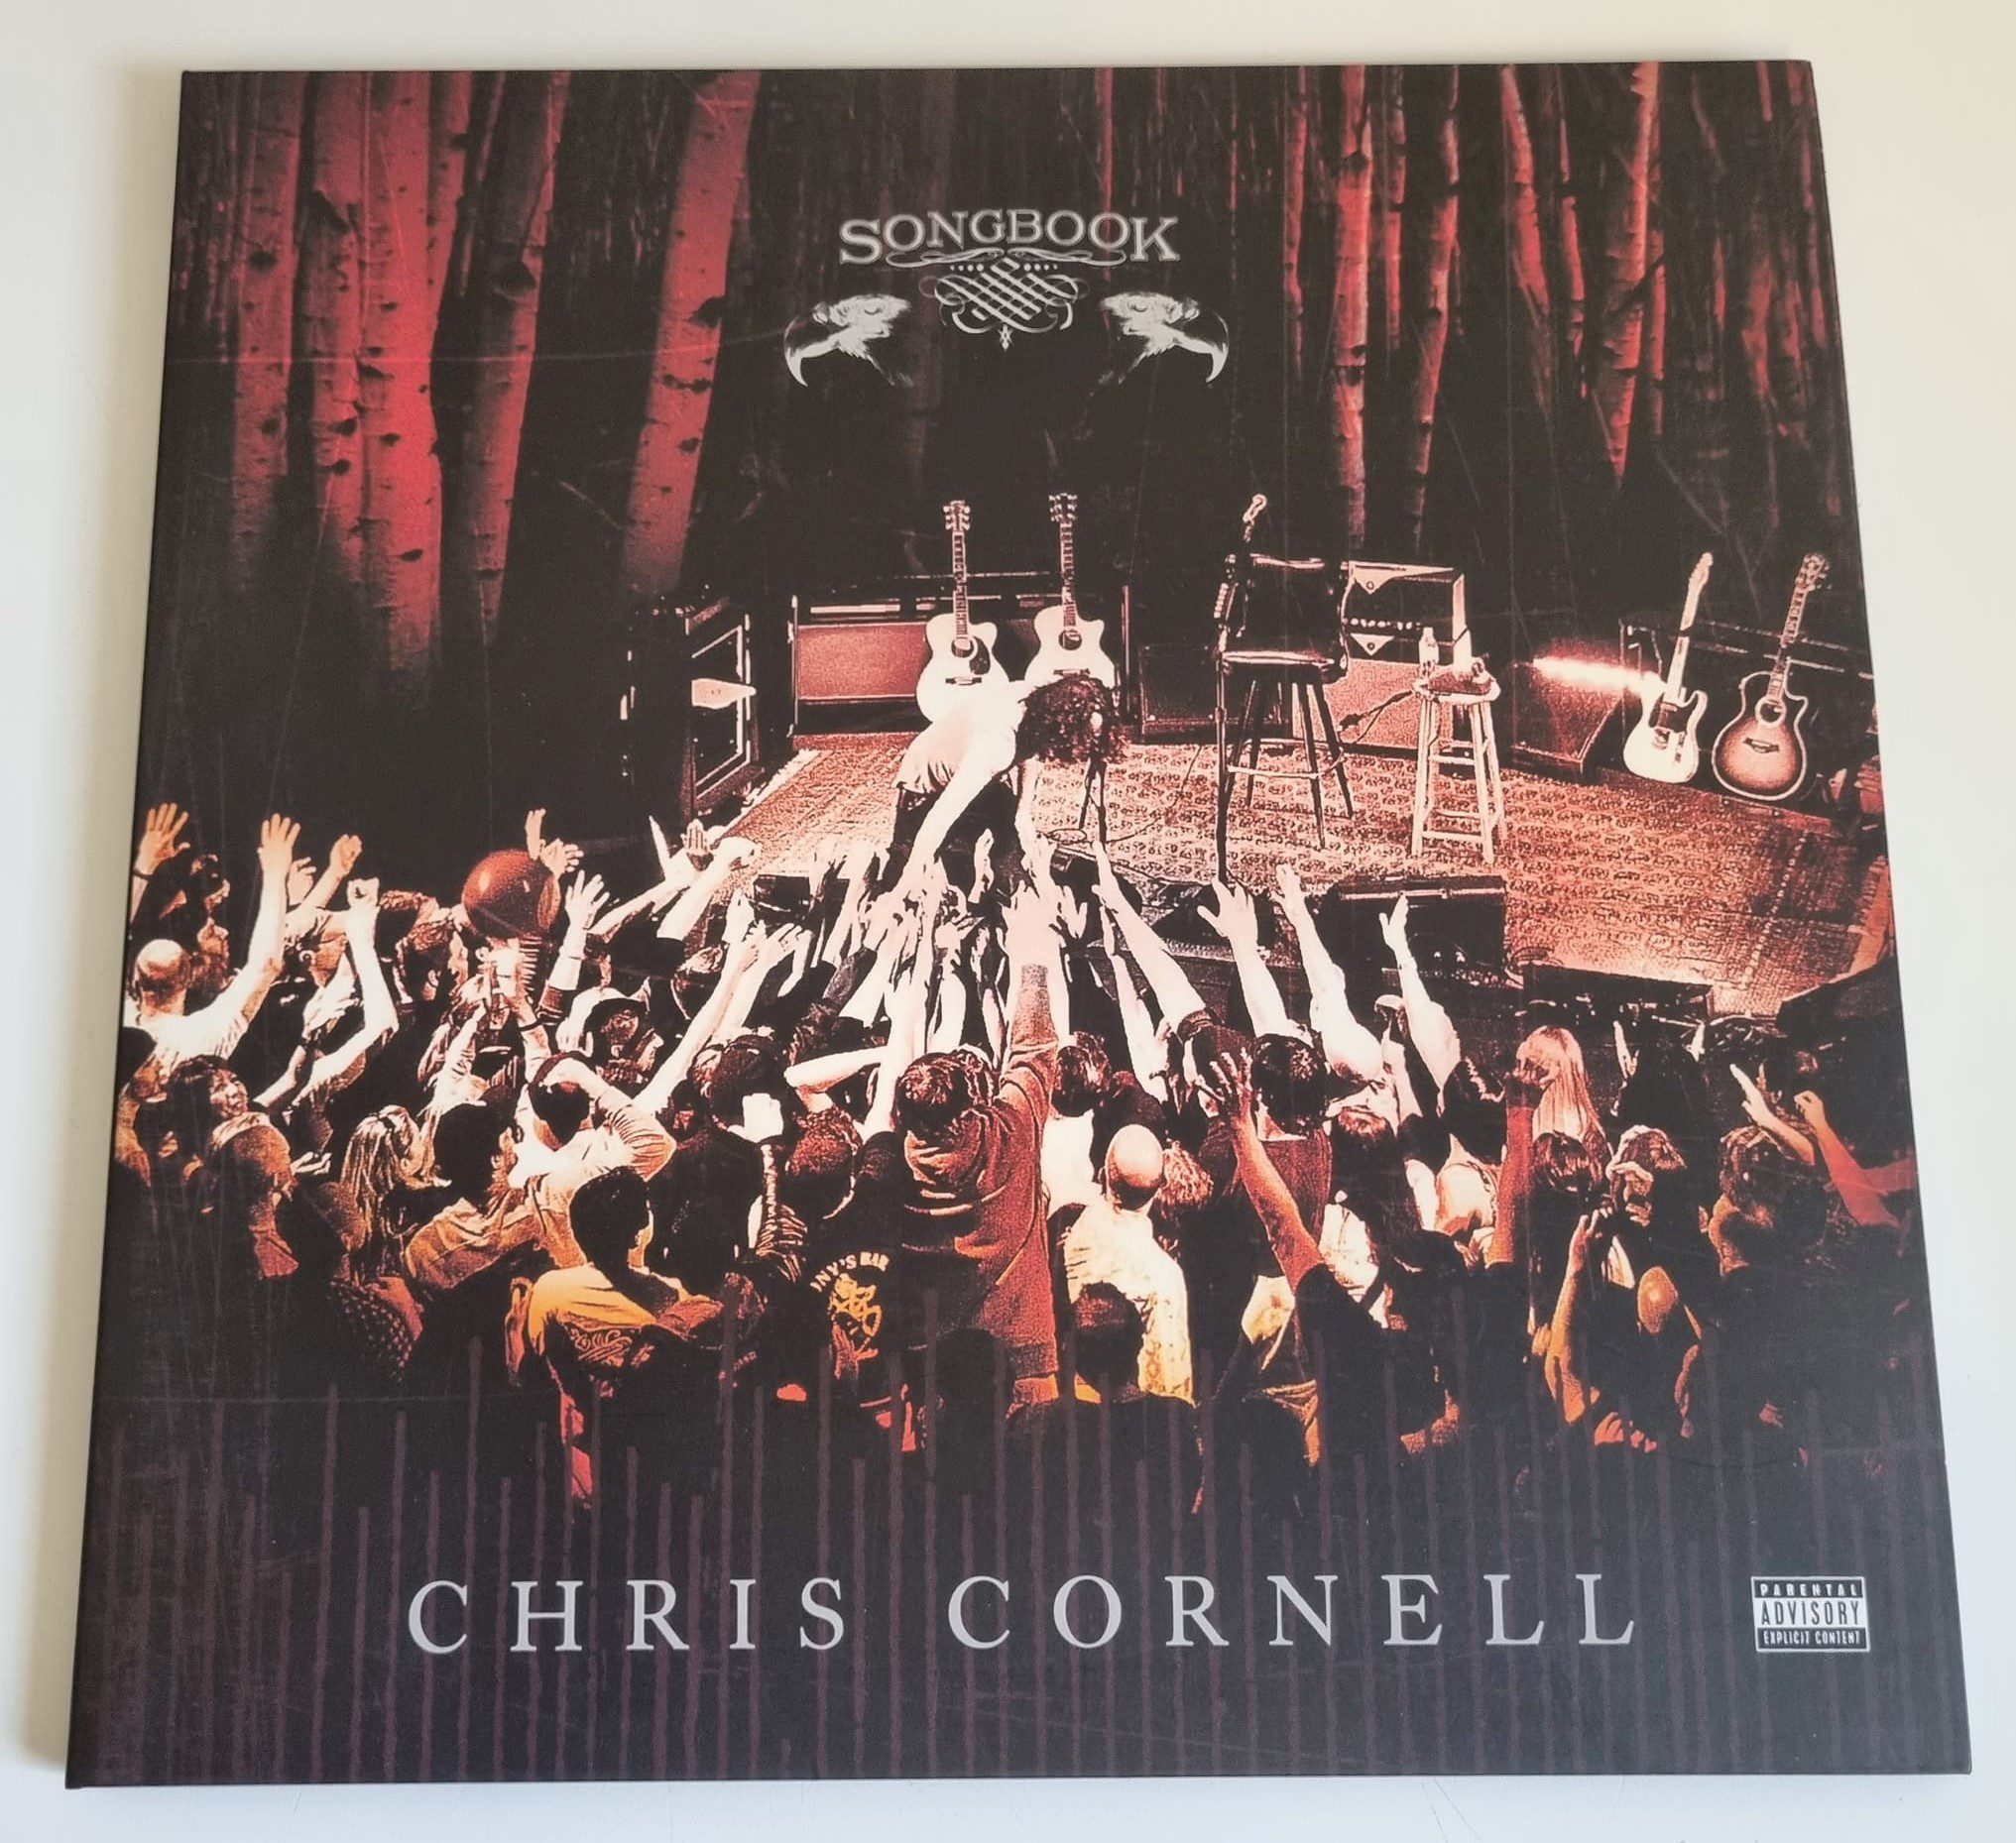 Buy this rare Chris Cornell record by clicking here